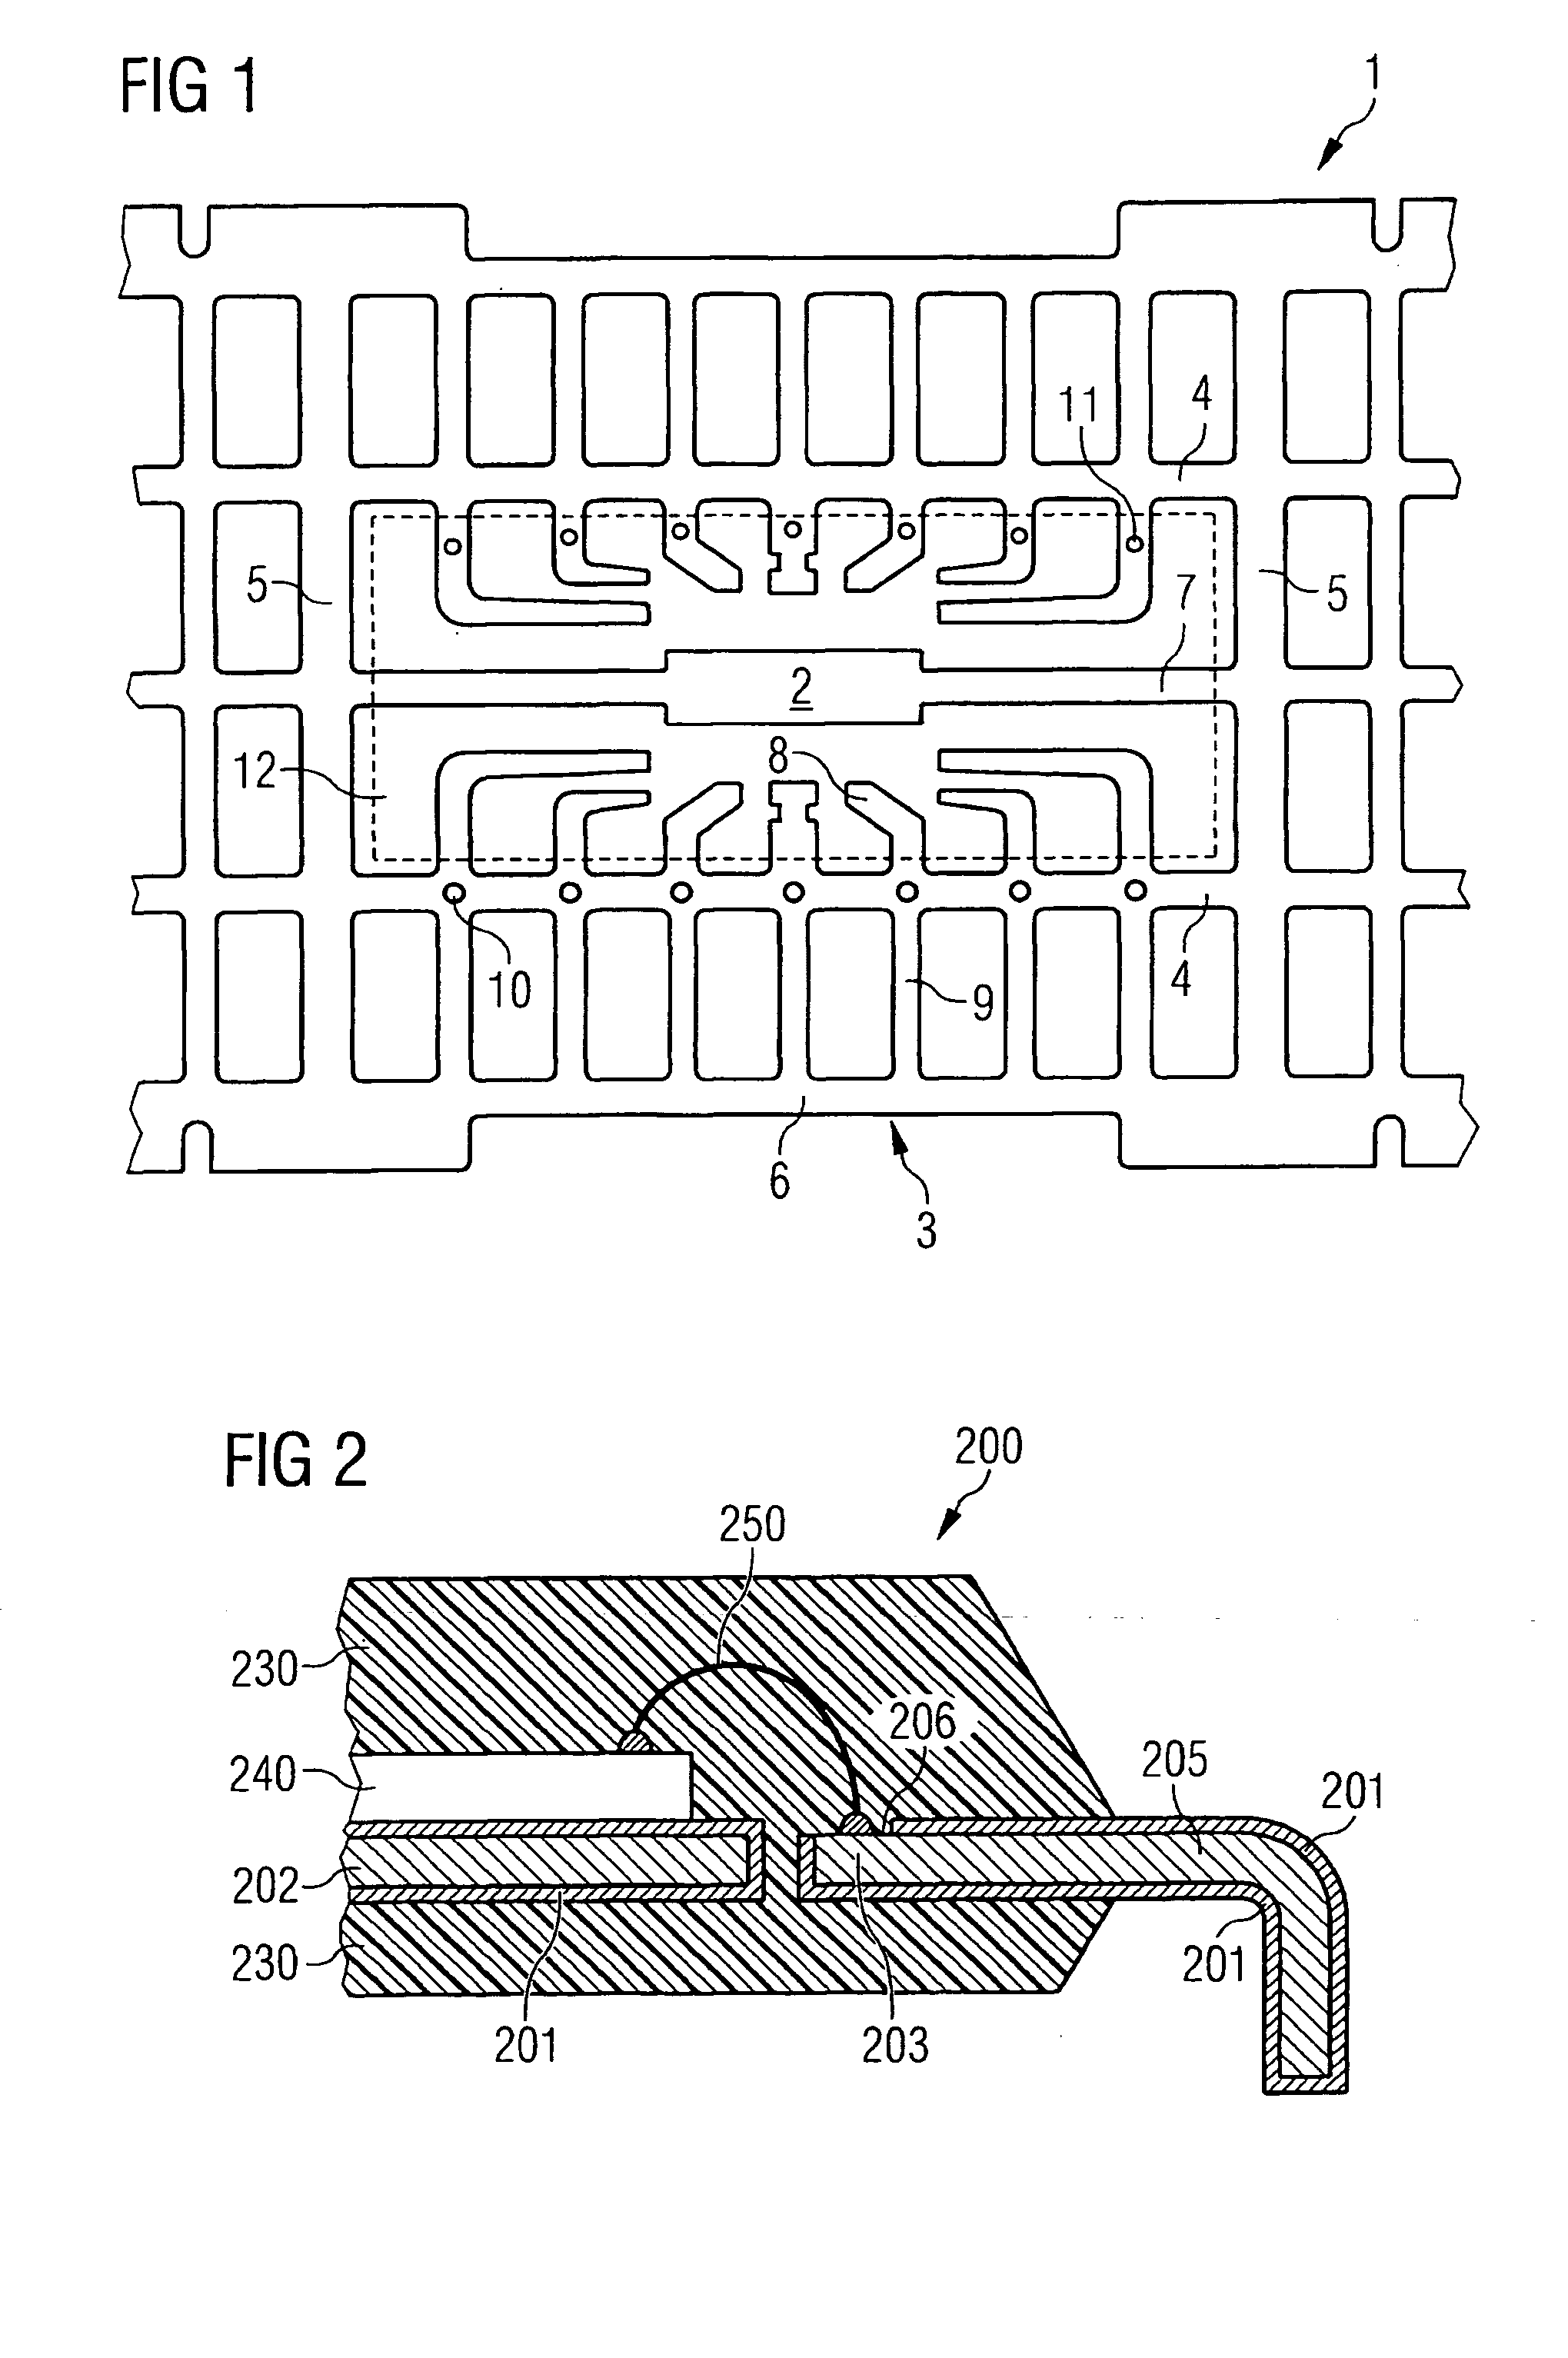 Leadframe for use in a semiconductor package